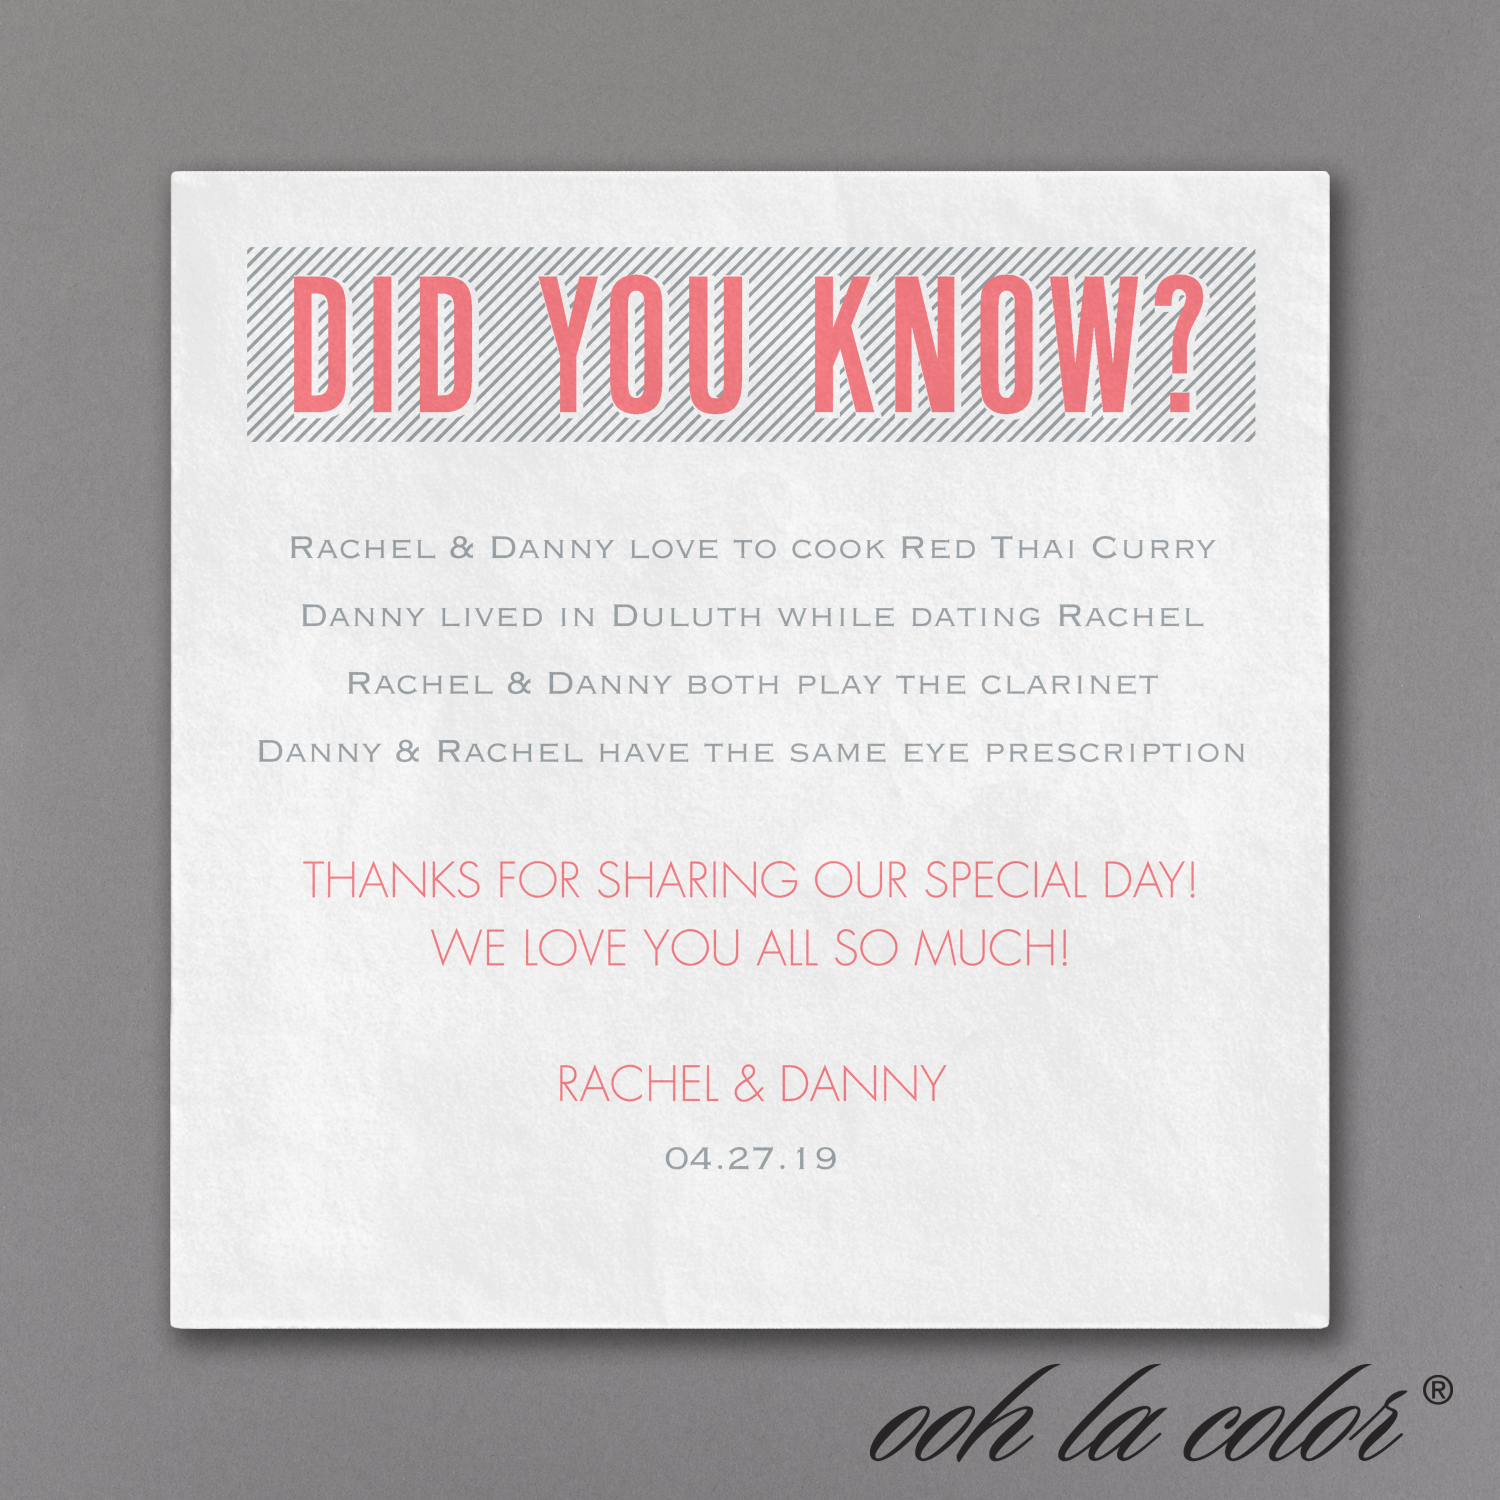 did you know facts napkin wedding